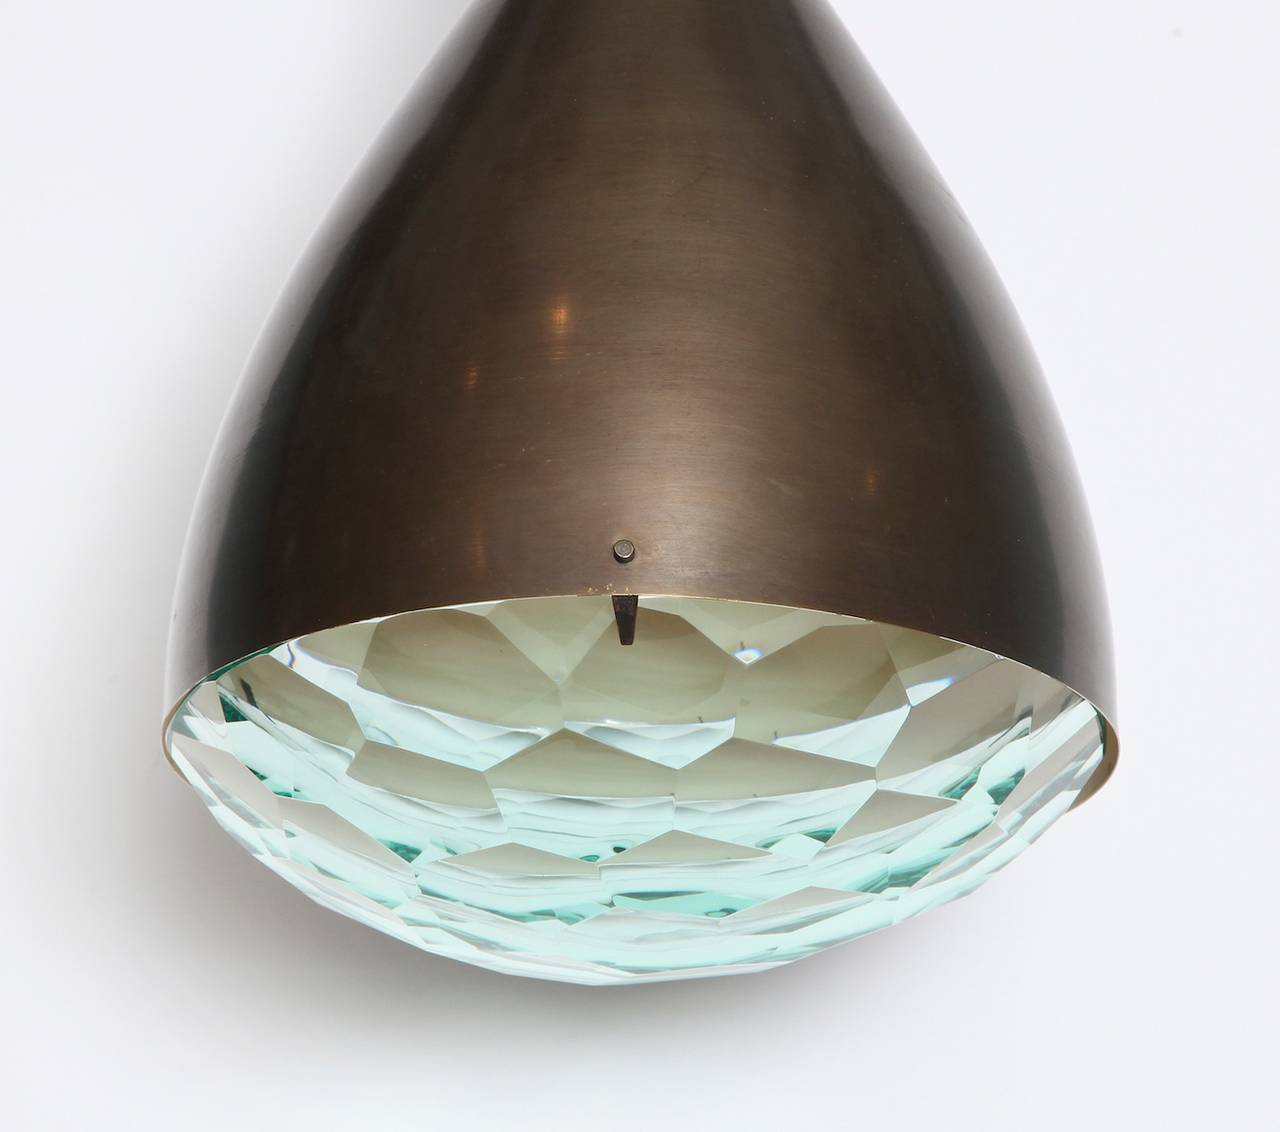 Rare pendant #2220 by Max Ingrand for Fontana Arte. Beautiful brass hanging pendant with dark oxidized finish, white painted interior and large faceted crystal diffuser. Holds one standard size bulb and can take up to 75 watts. Length of drop is